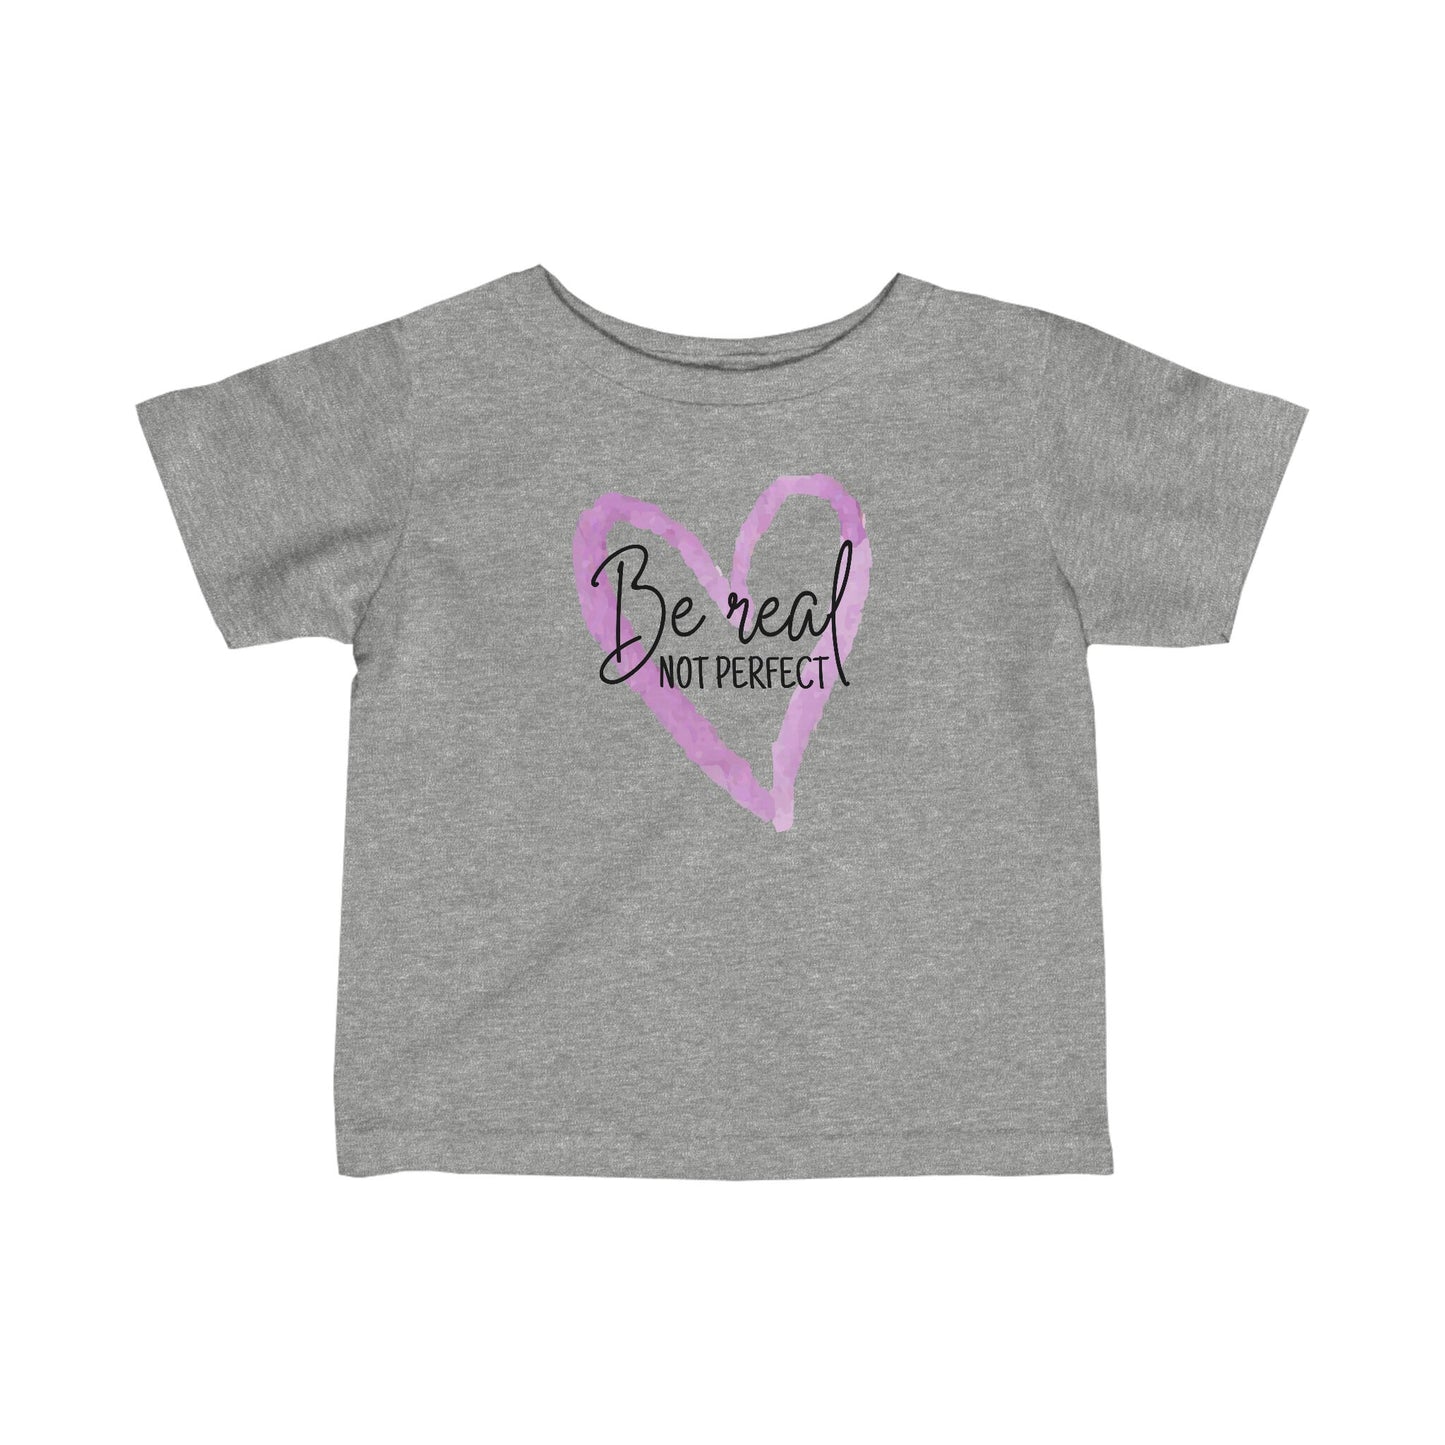 Be Real, Not Perfect - Infant Fine Jersey Tee